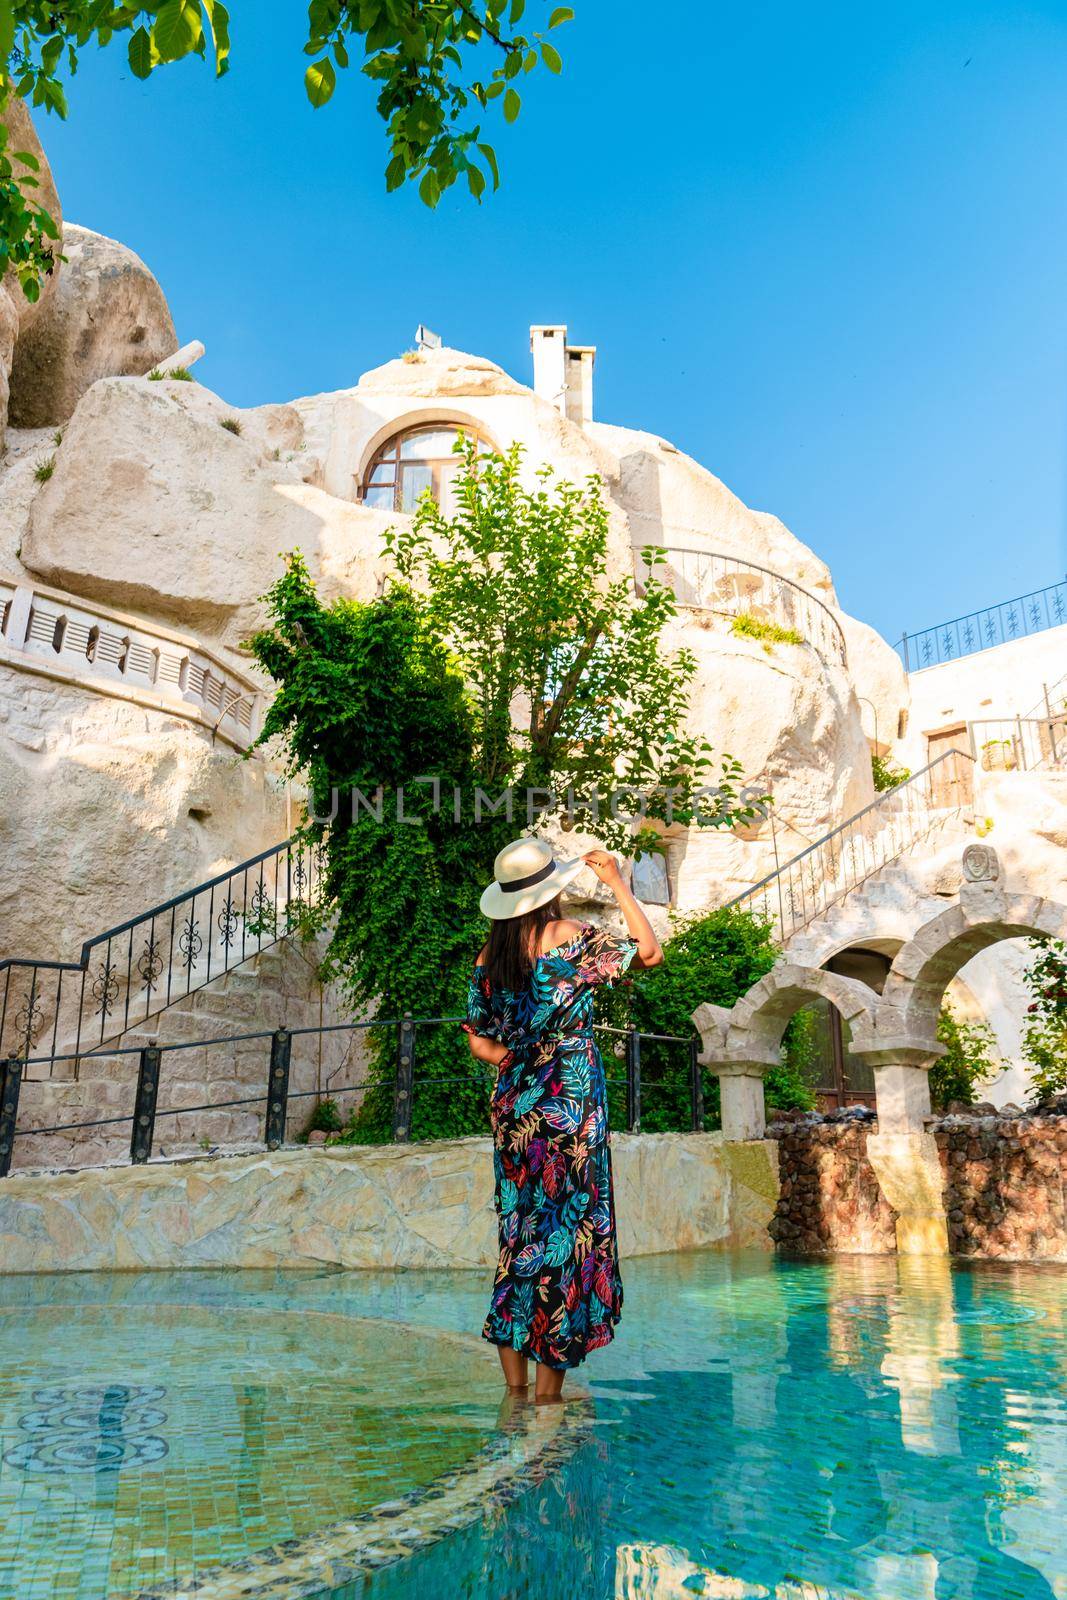 woman in dress at cave house, woman infinity pool cave house hotel in the mountains of Cappadocia.